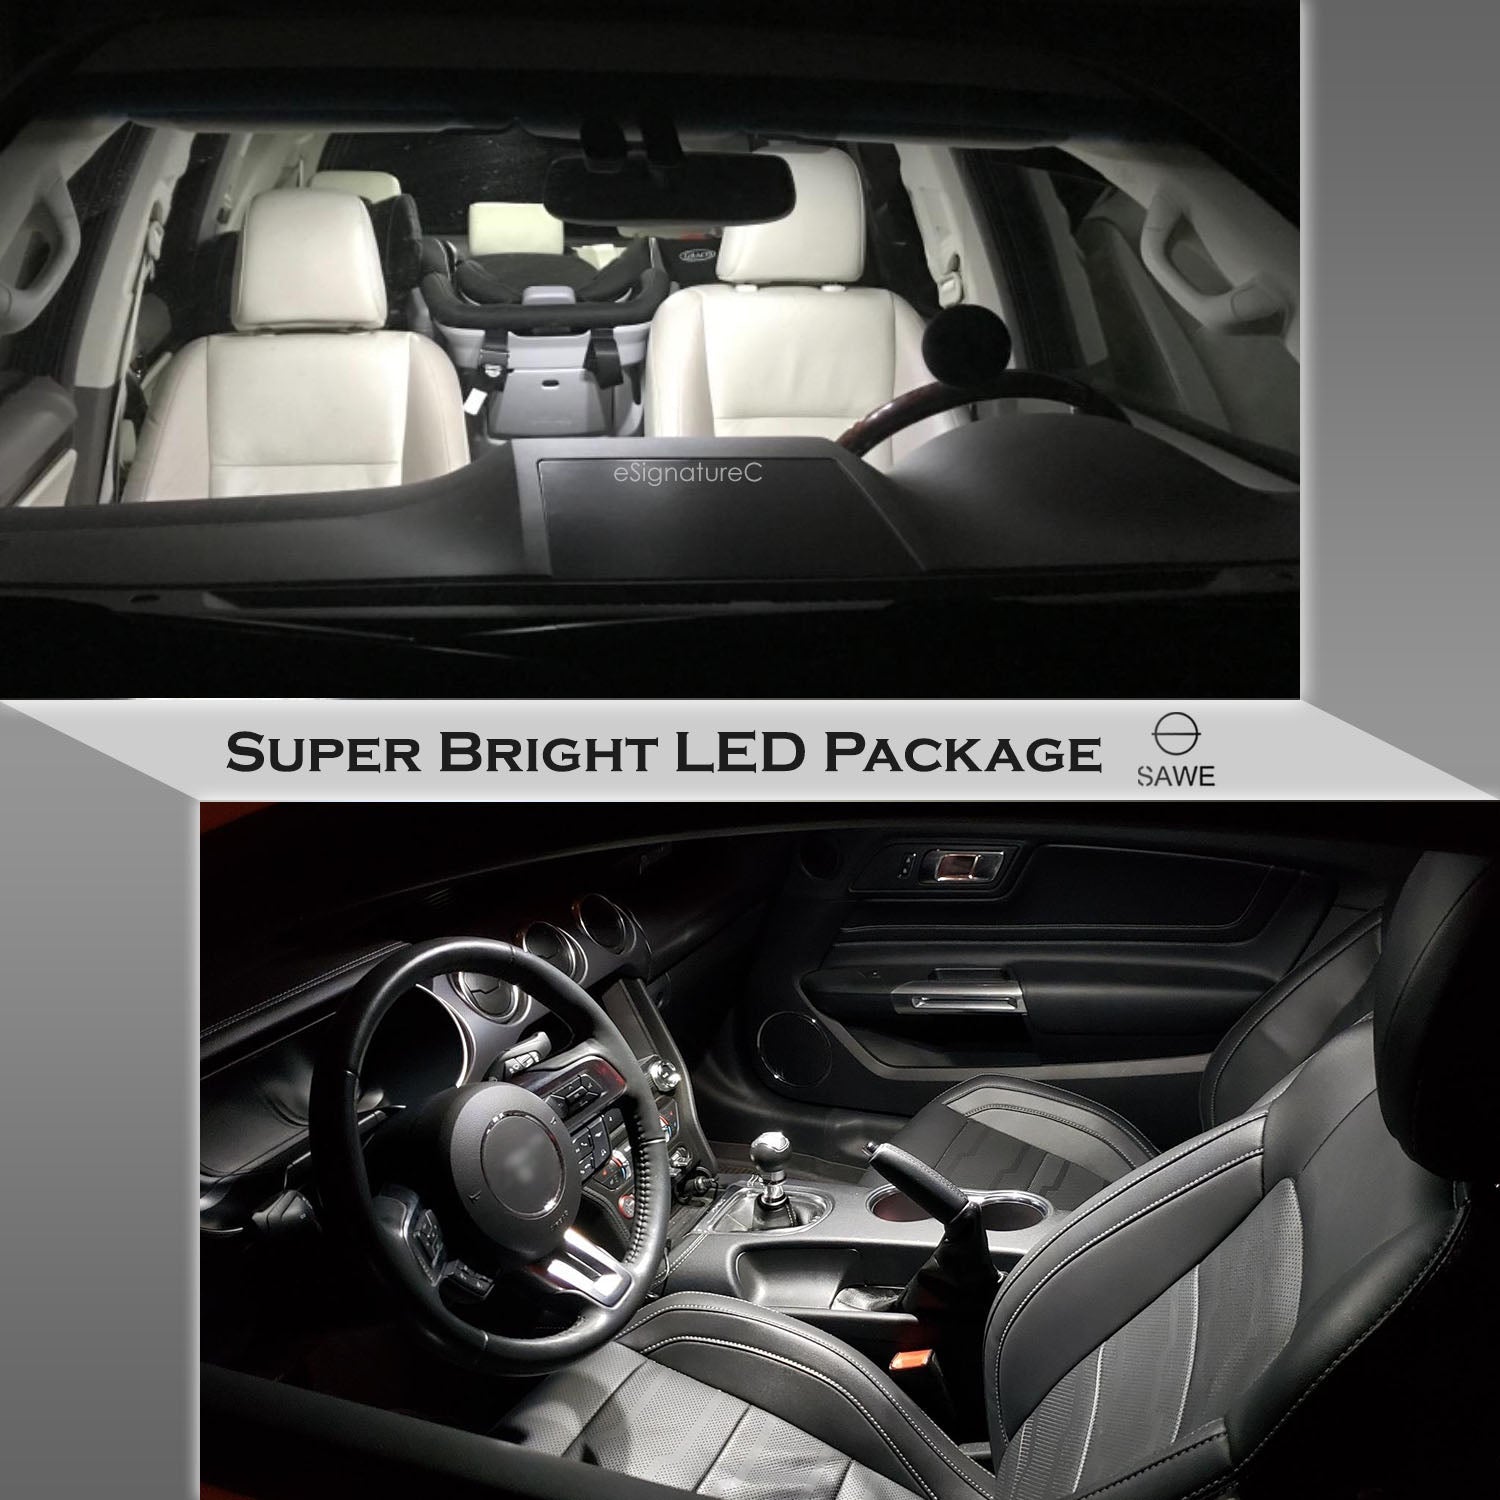 For Subaru Legacy Interior LED Lights - Dome & Map Light Bulbs Package Kit for 2010 - 2014 - White